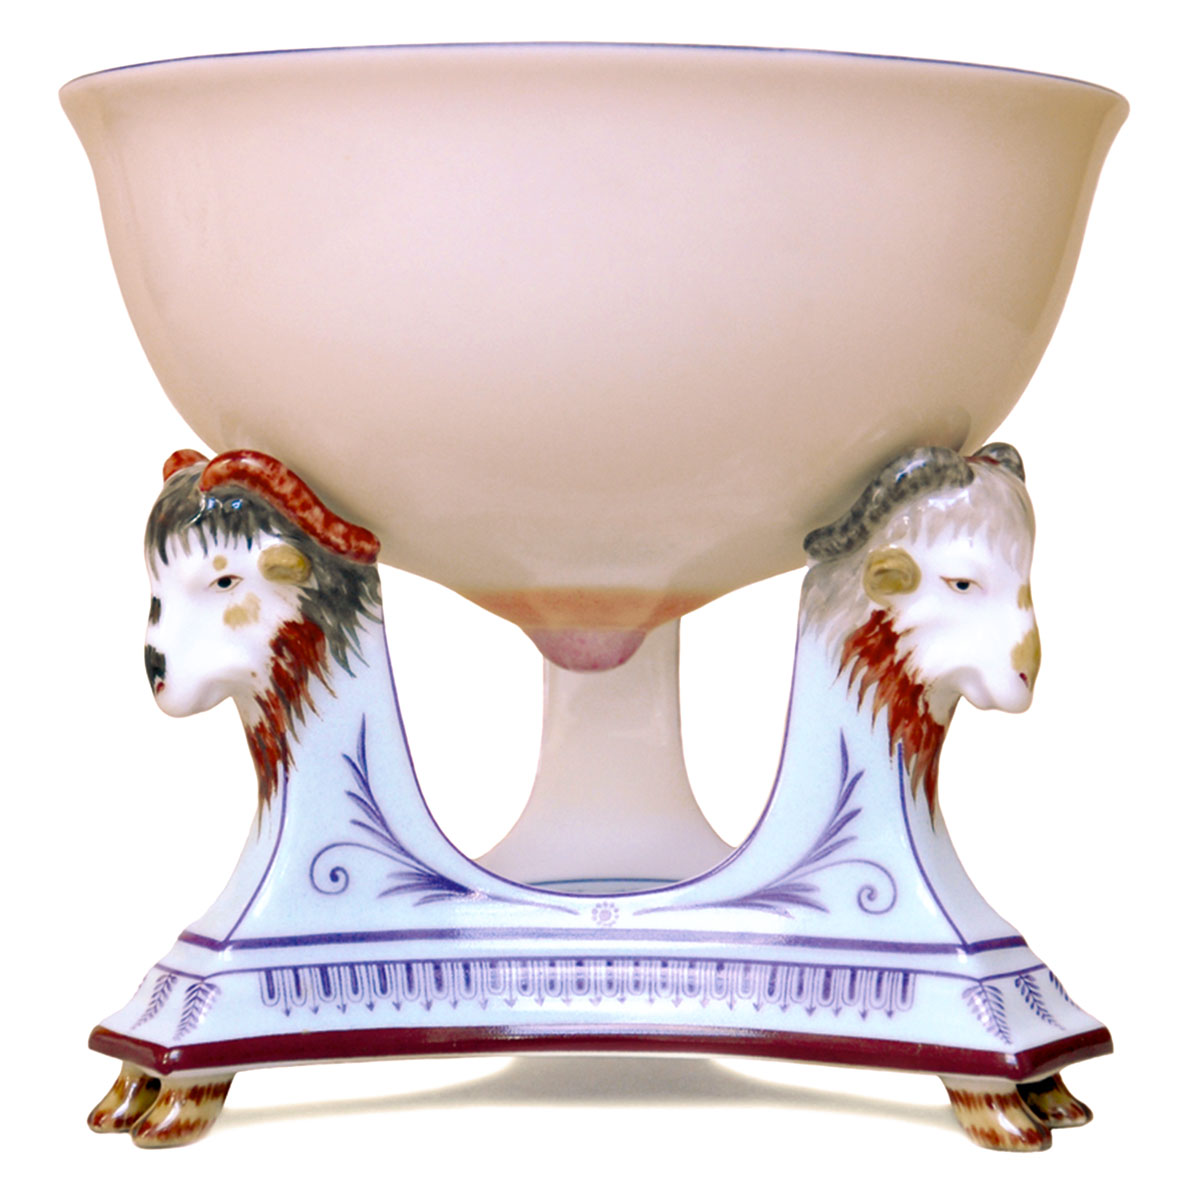 Replica of the Sèvres “breast cup” (jatte téton) designed by Jean-Jacques Lagrenée for the Queen’s Dairy at Rambouillet, 1786–1787. Photo Claire Lehmann.